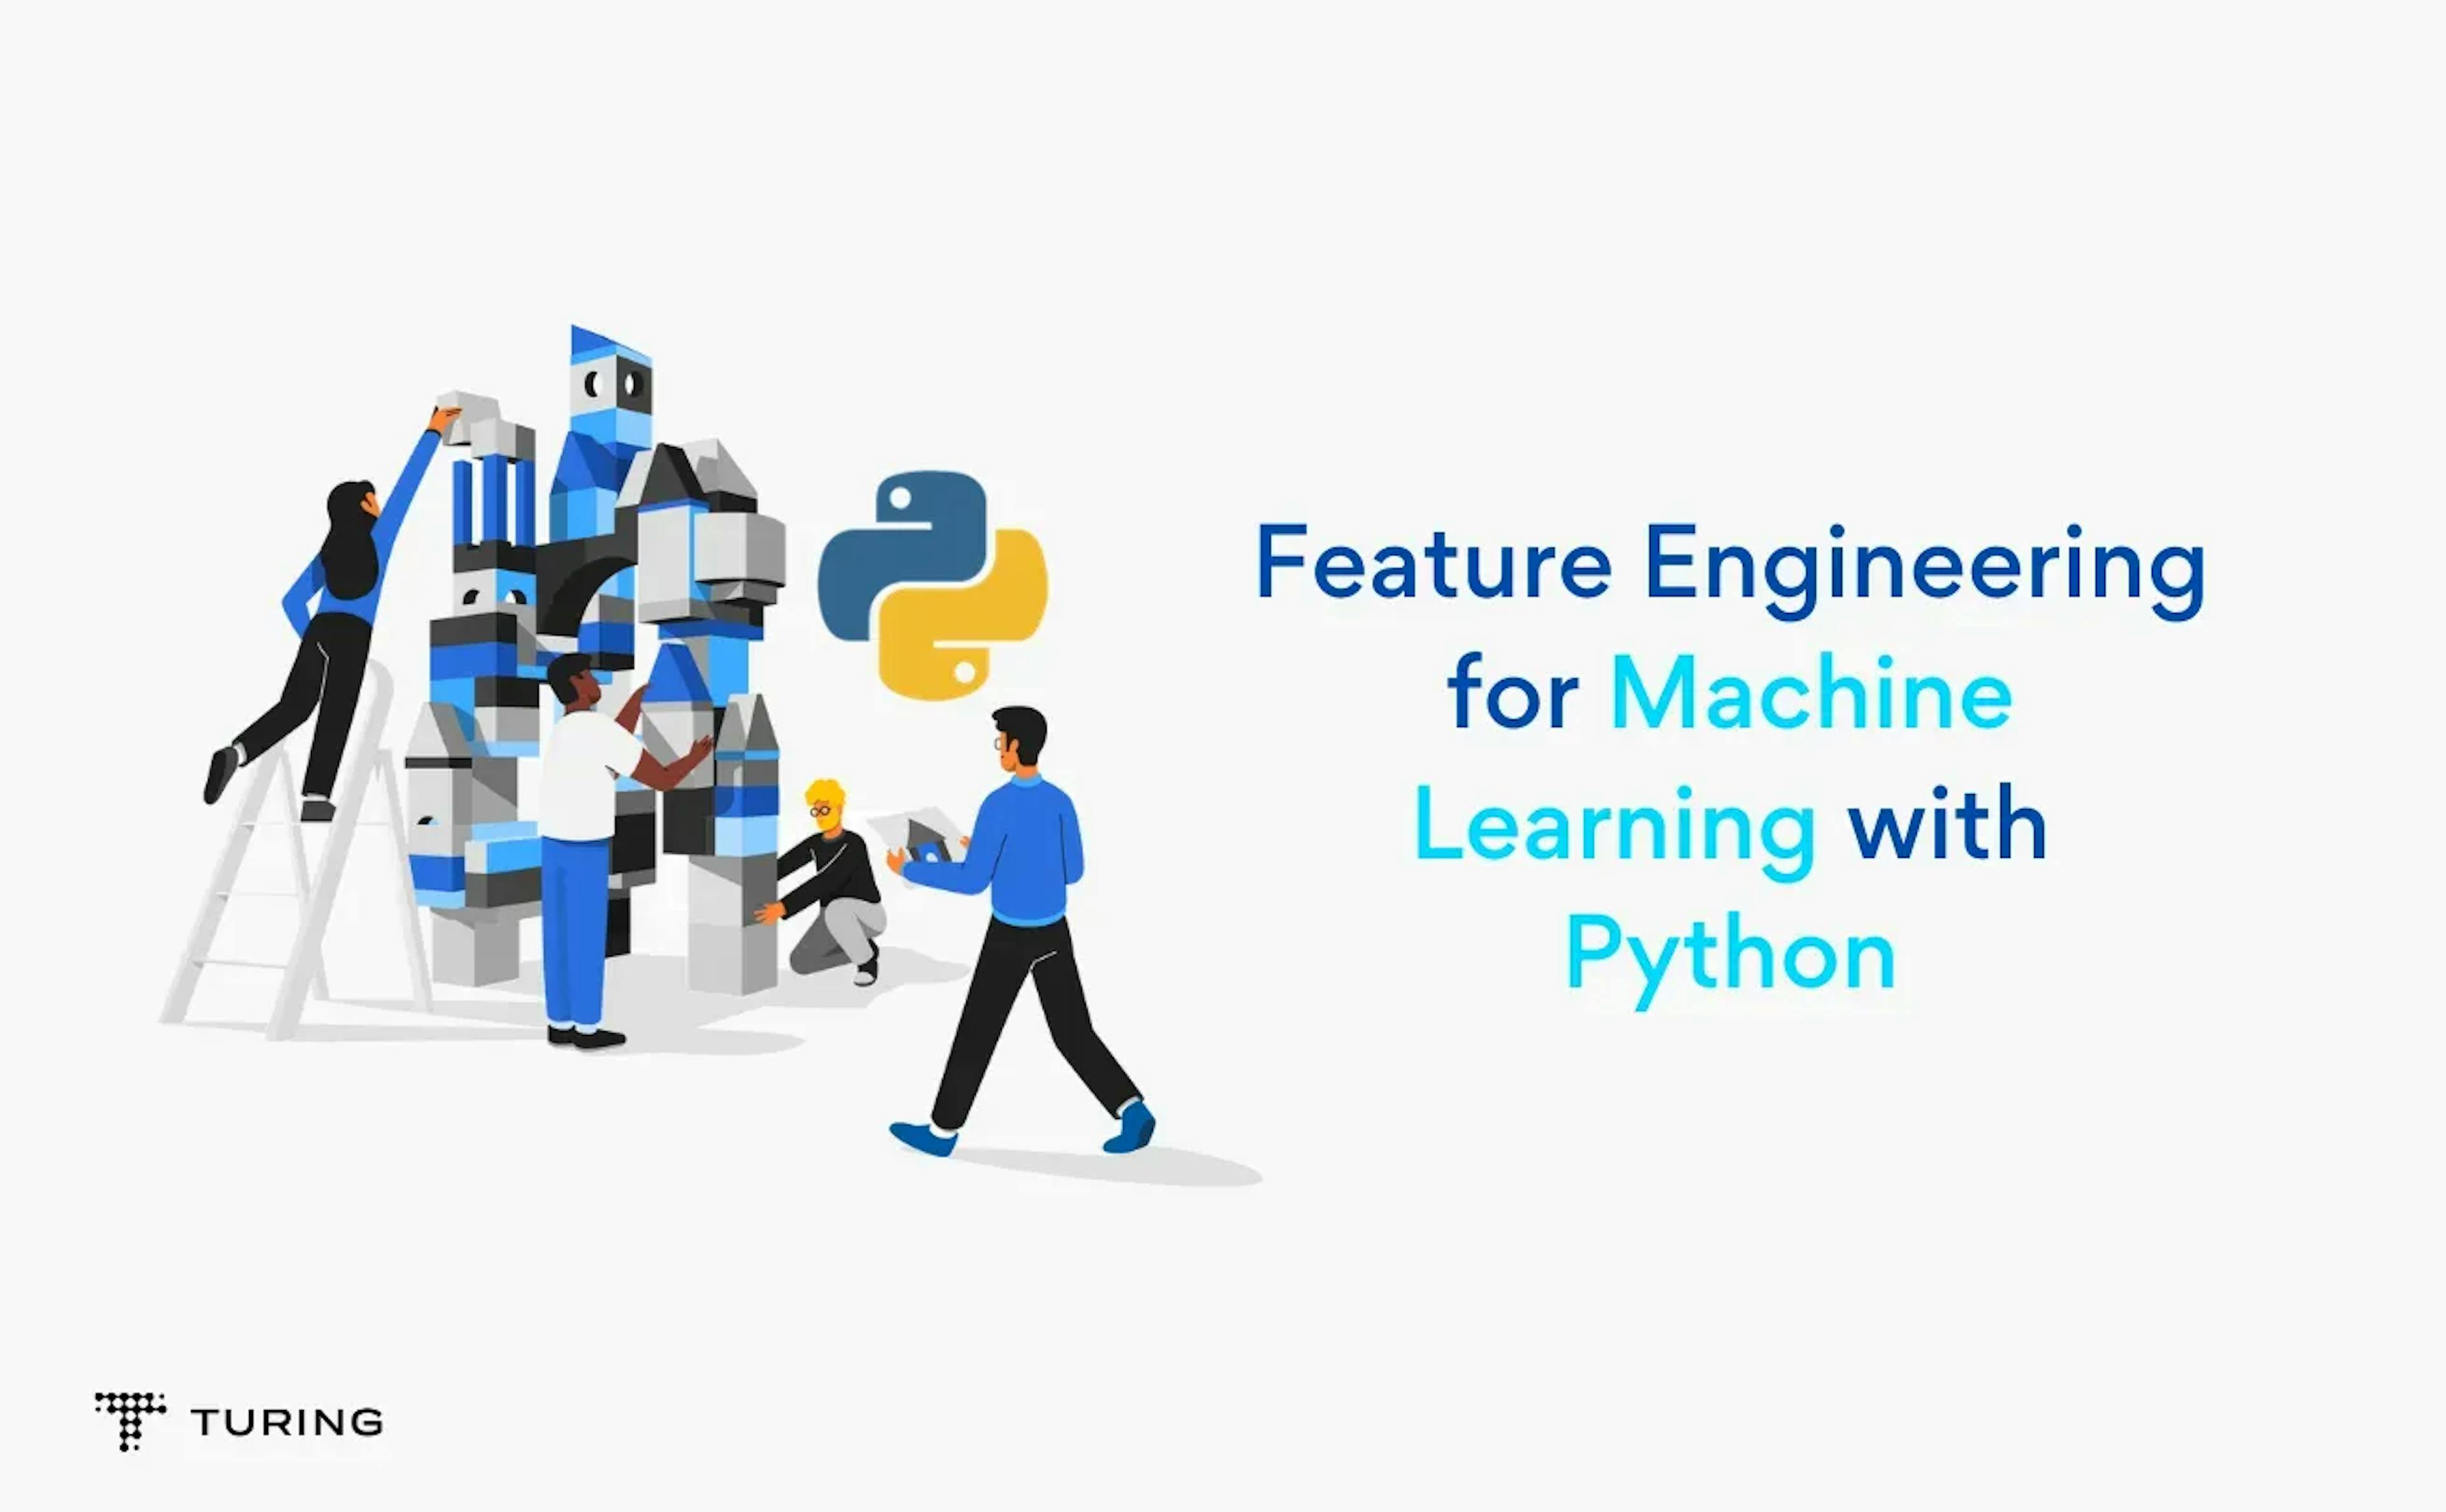 Feature Engineering for Machine Learning with Python